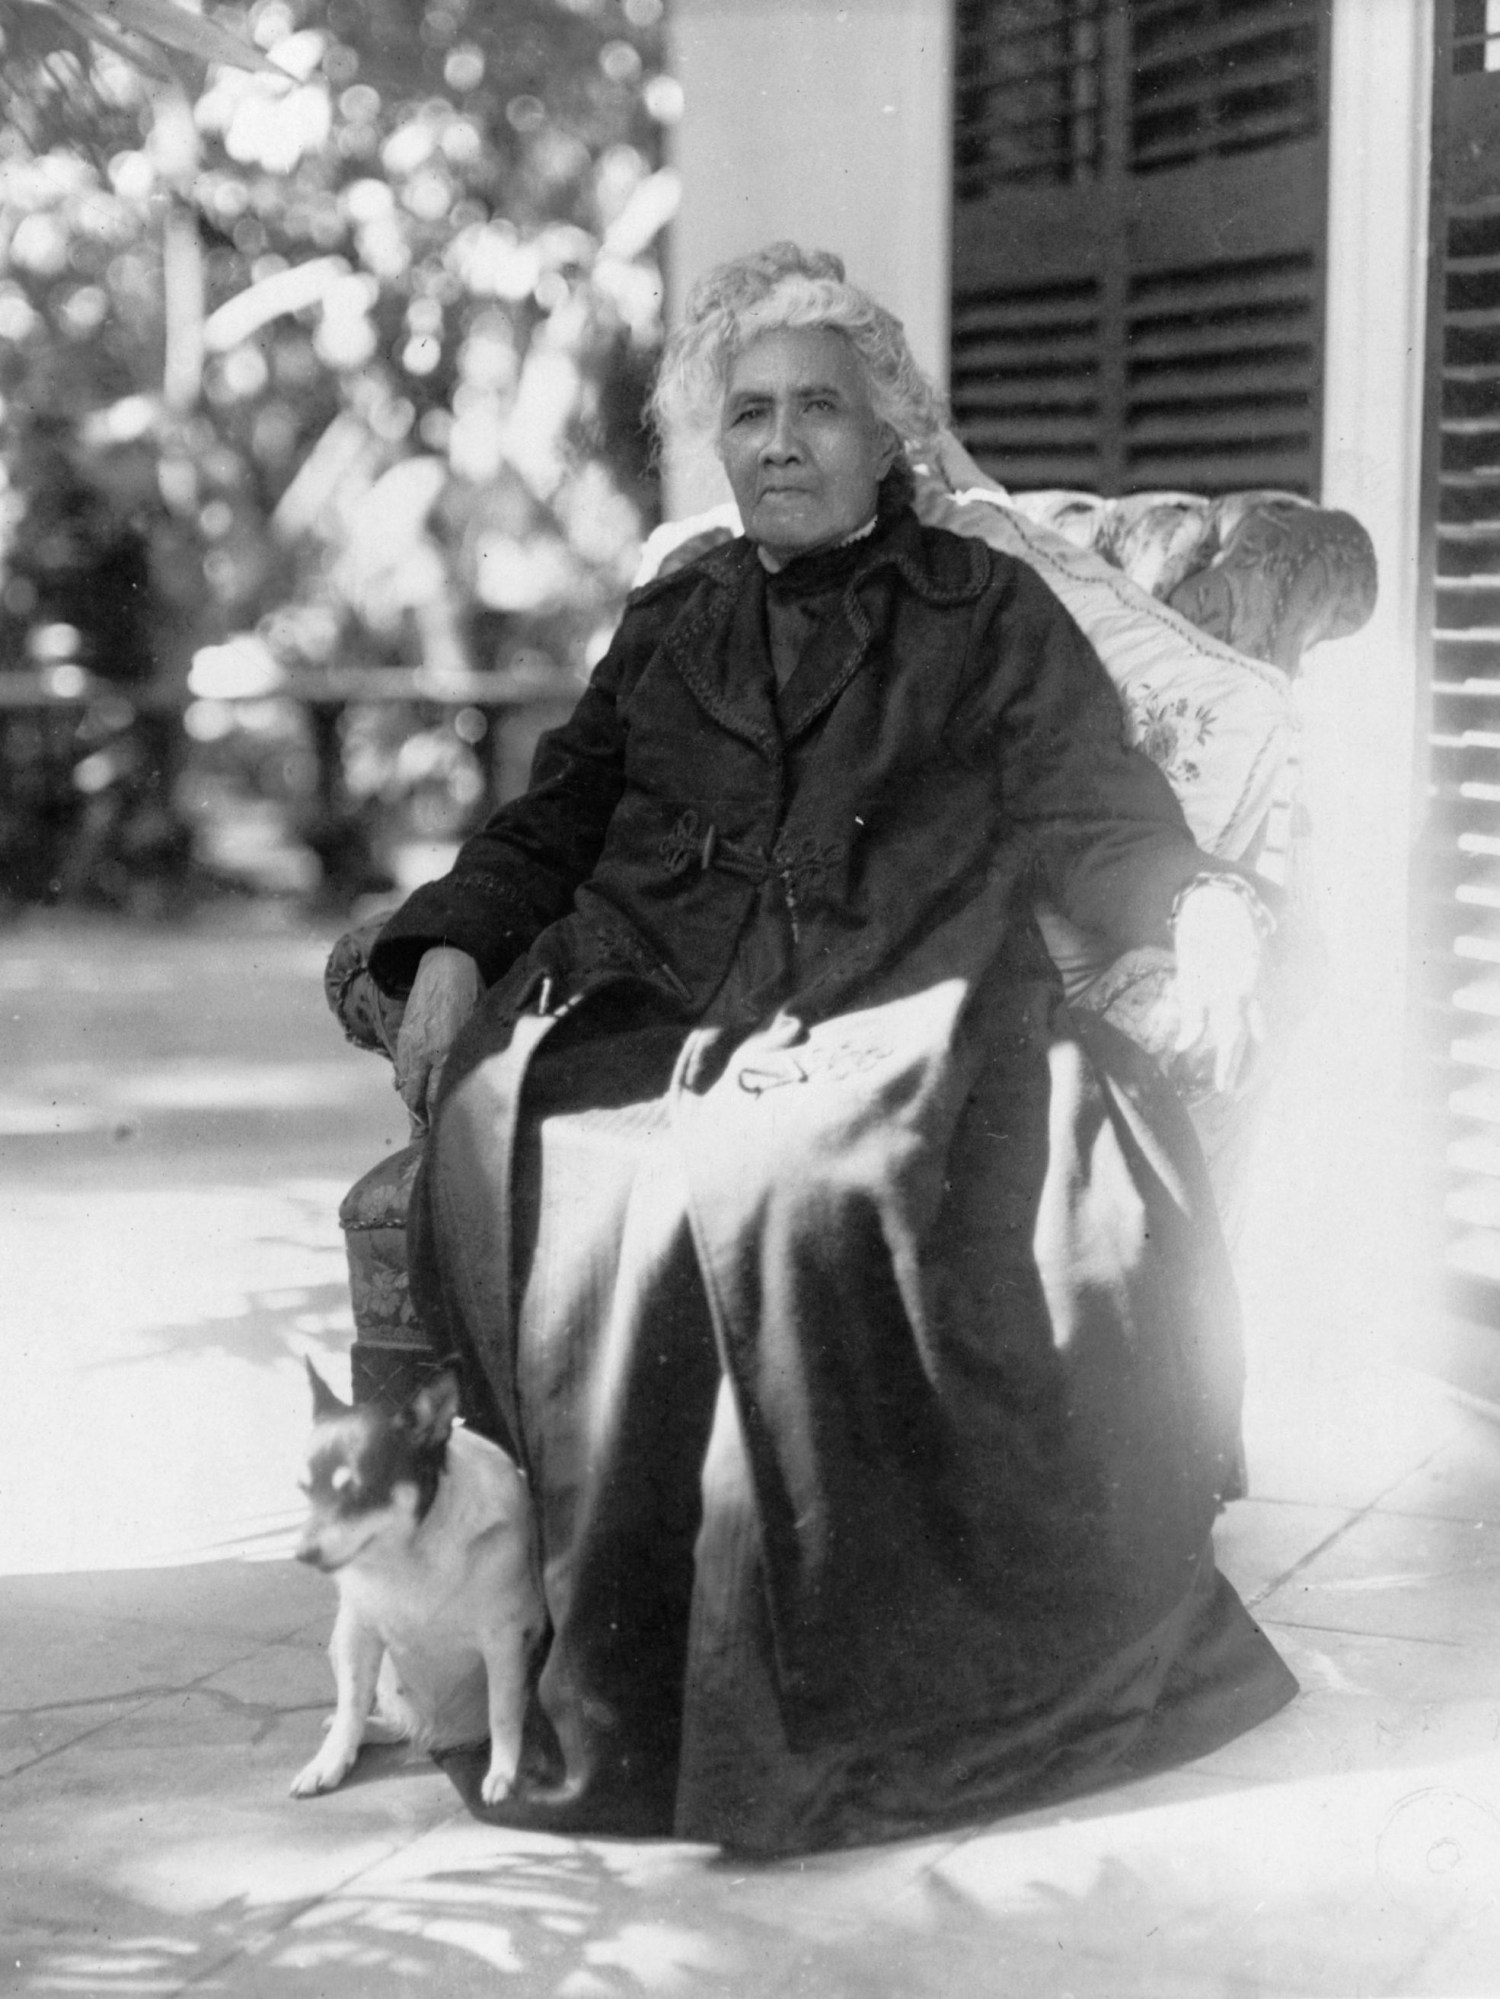 Queen Liliuokalani in a formal seated portrait